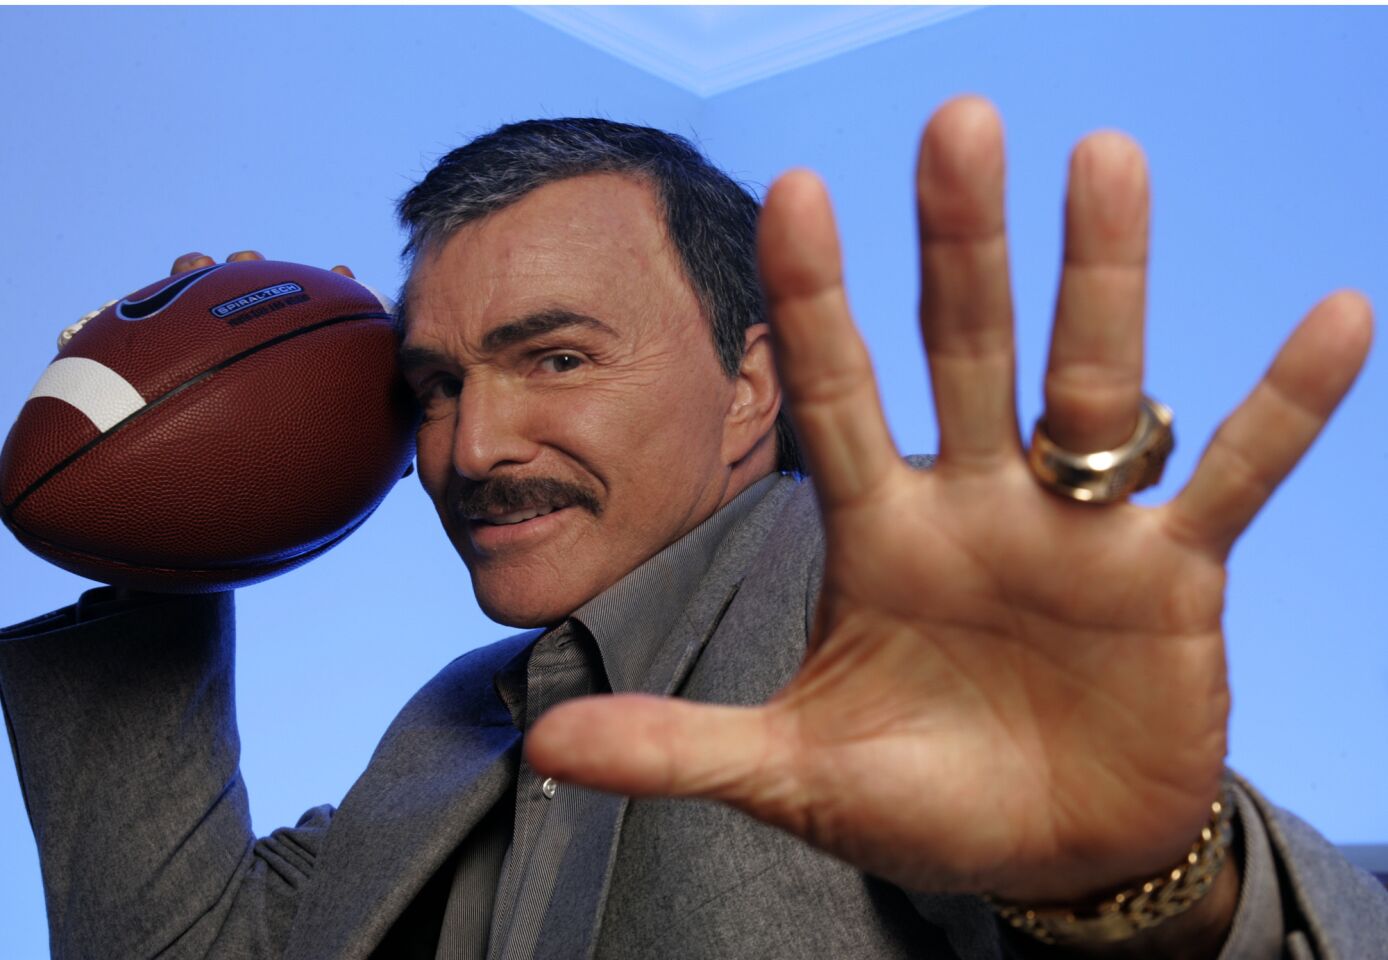 Burt Reynolds is photographed by The Times on May 13, 2005, as he promotes his role in the film "The Longest Yard," a remake of his 1974 film.